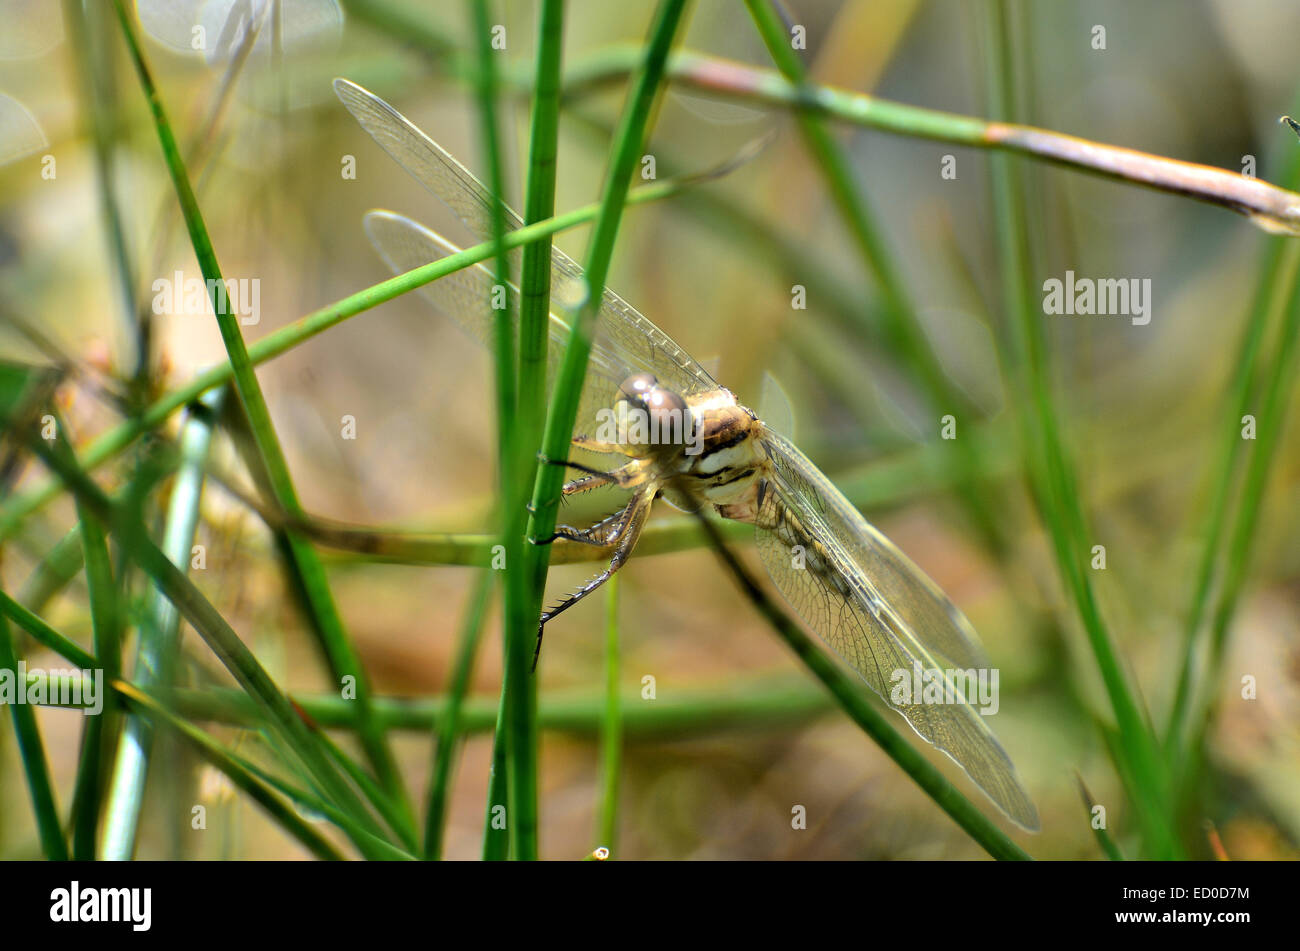 A blue dragonfly resting nearby a lake Stock Photo